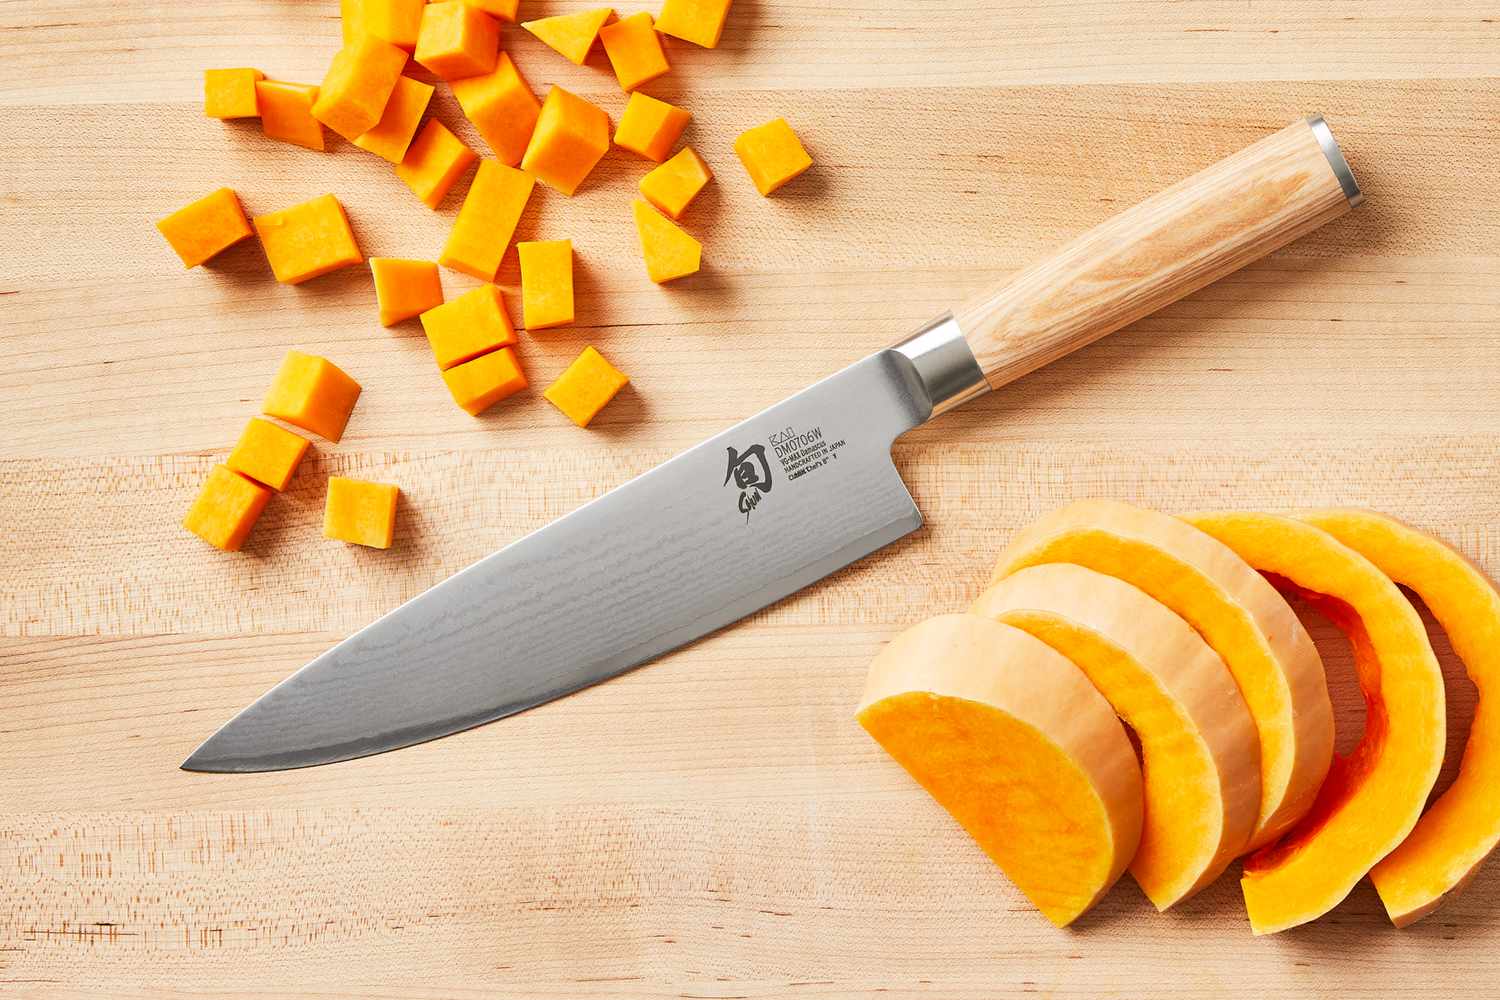 Shun Classic Chef’s 8-Inch knife on a wooden cutting board with sliced and diced butternut squash